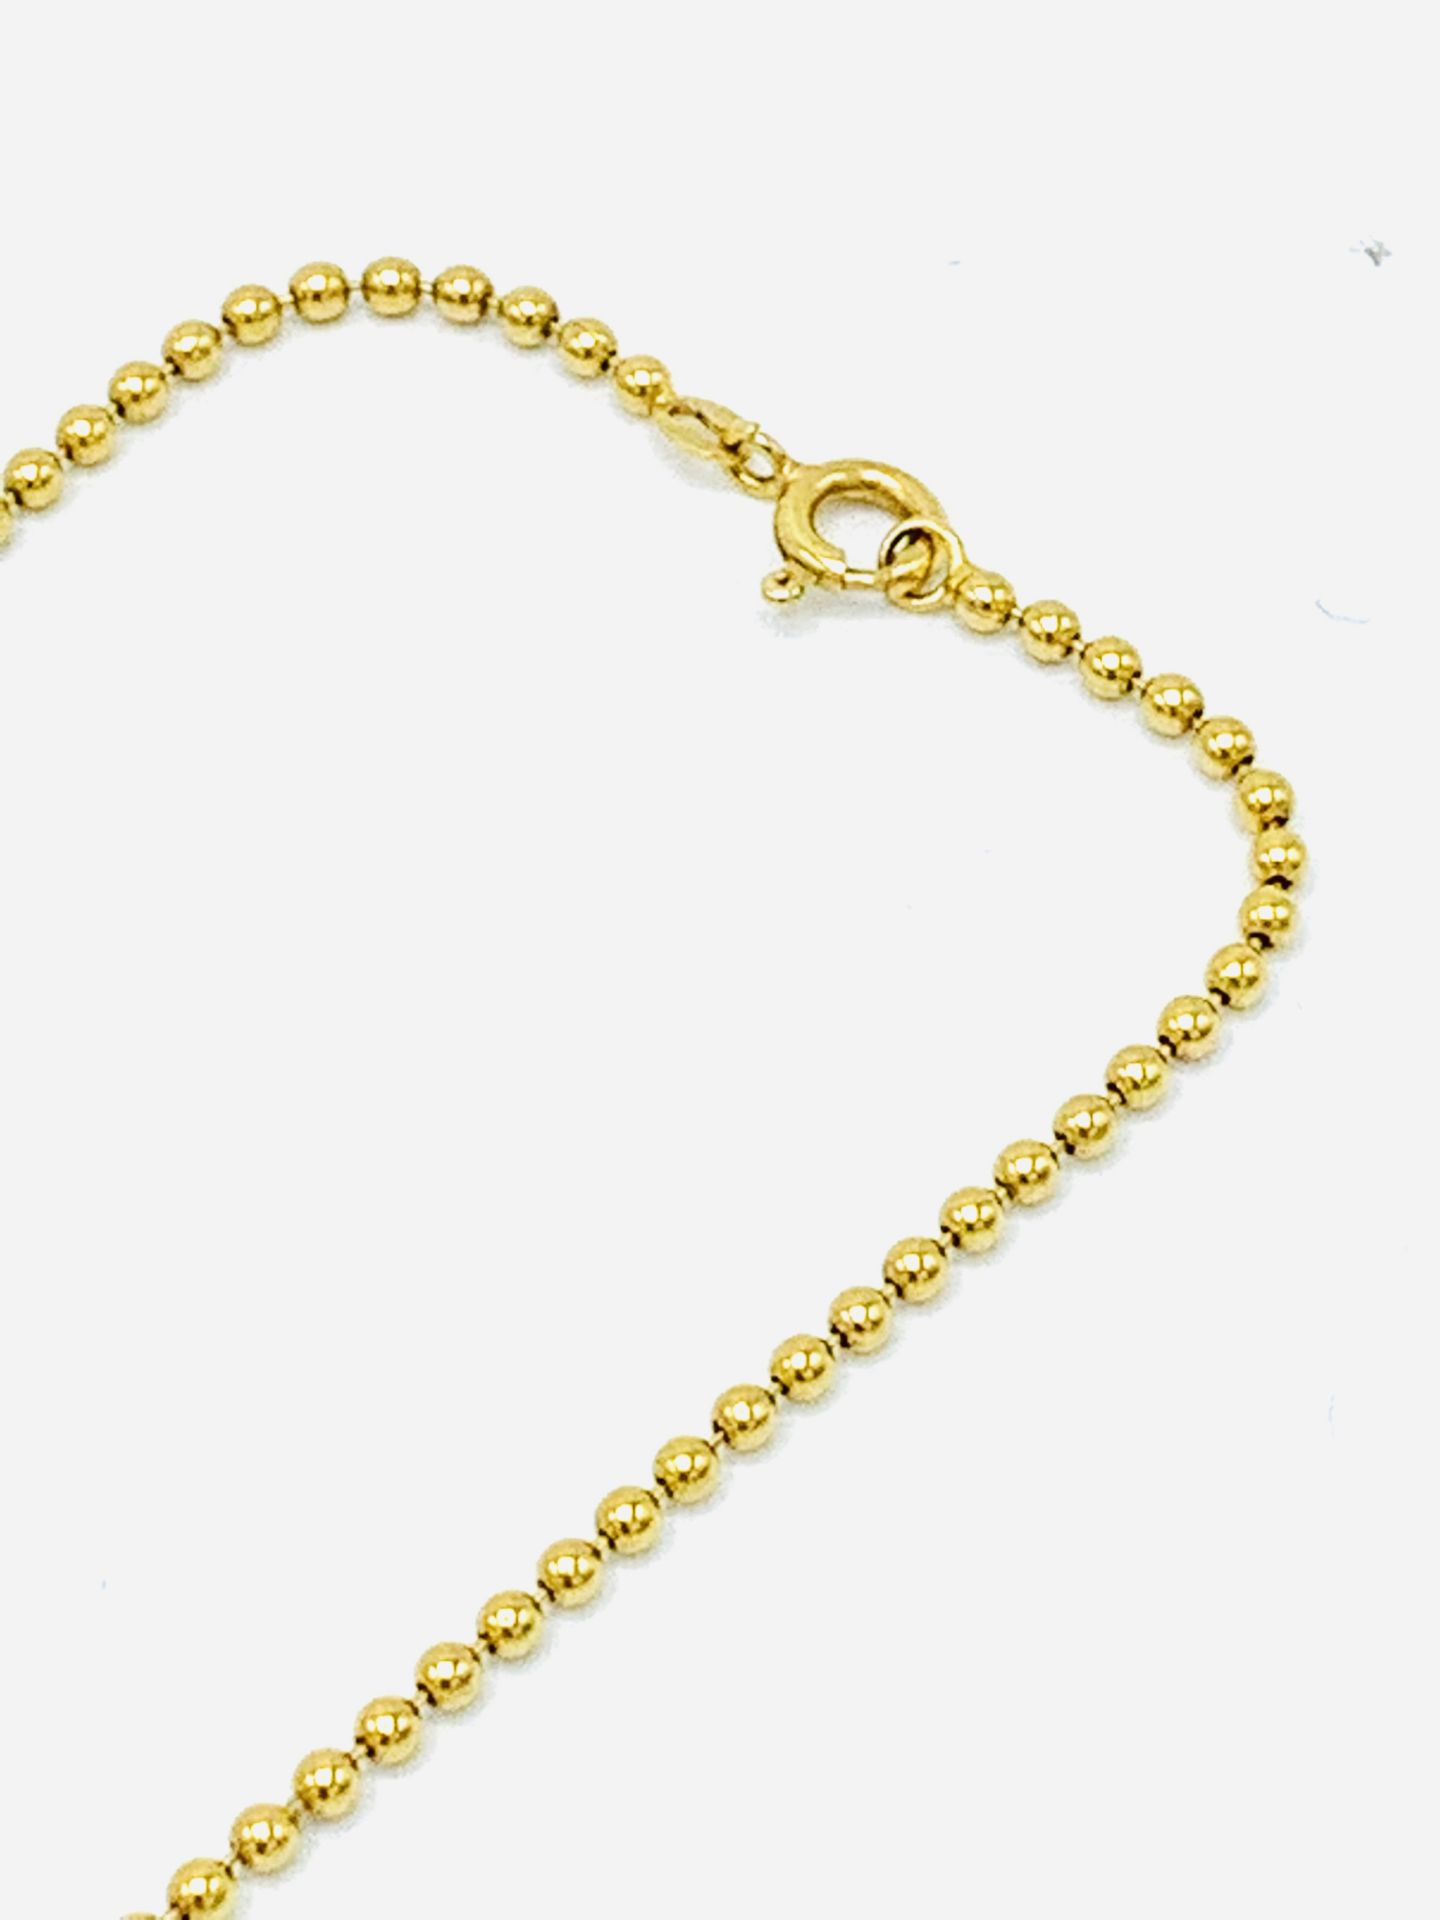 750 gold pin necklace. - Image 3 of 5